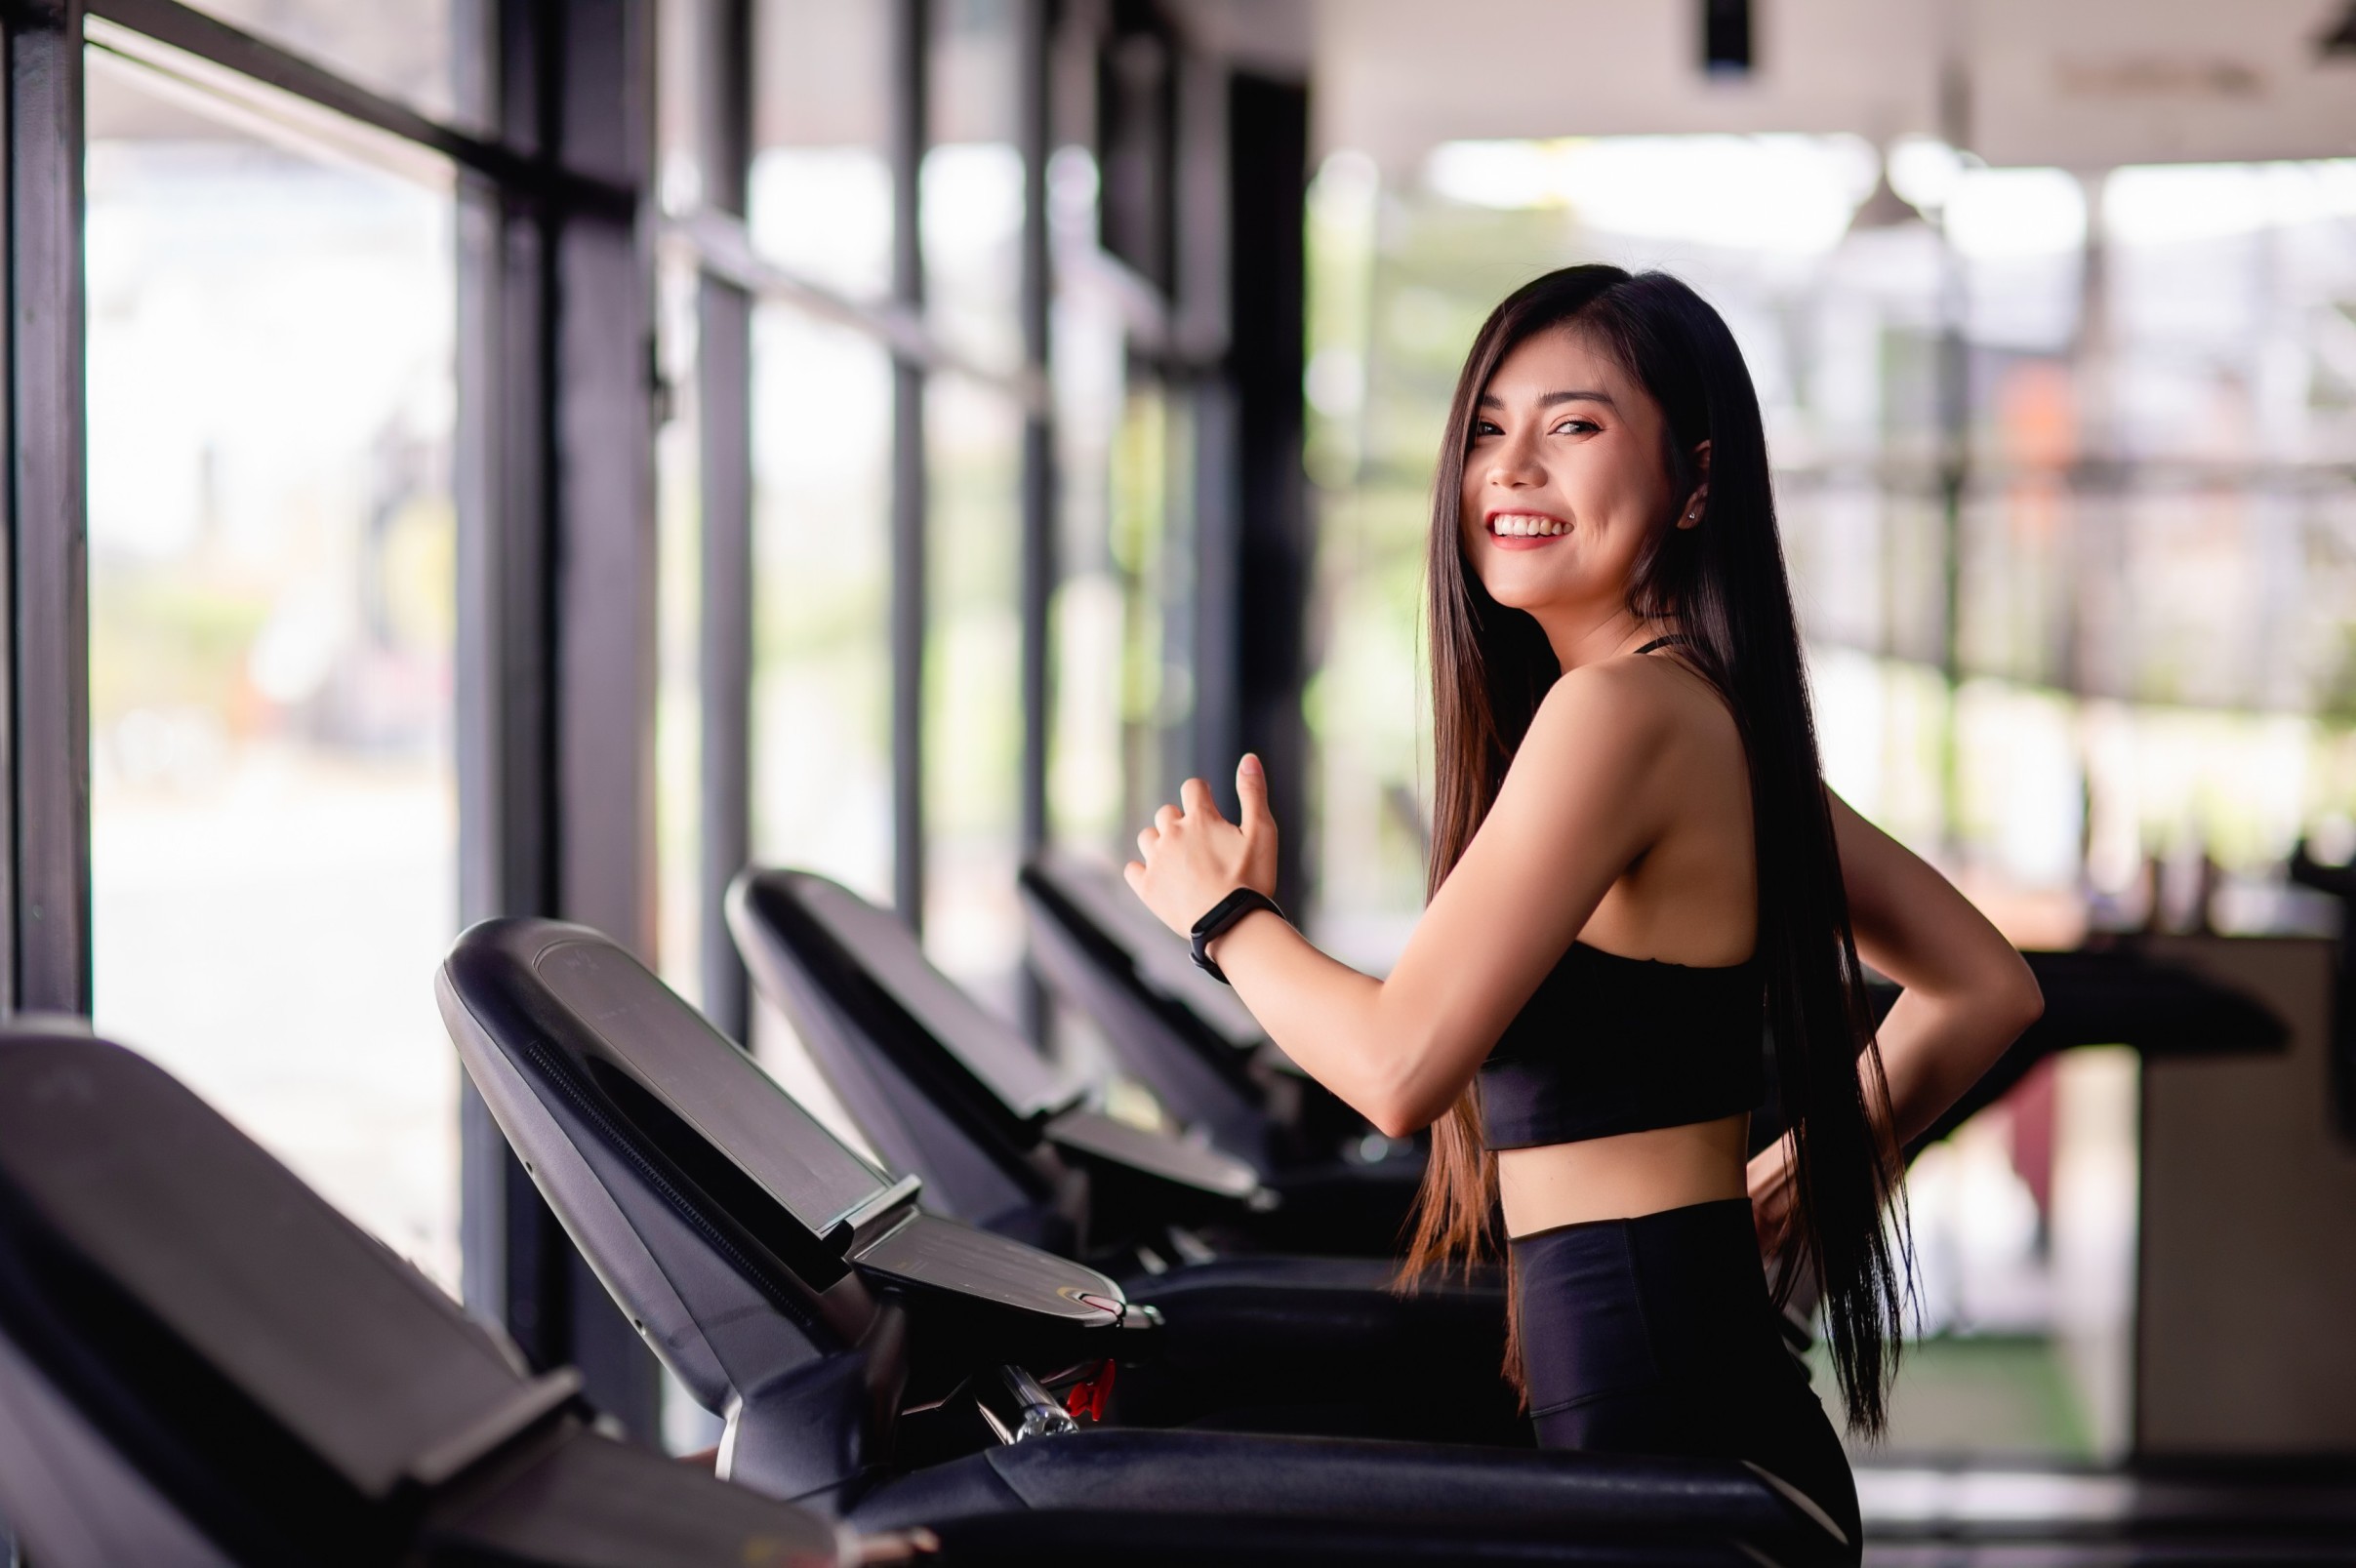 portrait-young-healthy-woman-running-treadmill-she-smile-during-workout-gym-healthy-lifestyle-concept-copy-space-vertical-image (1) (1)